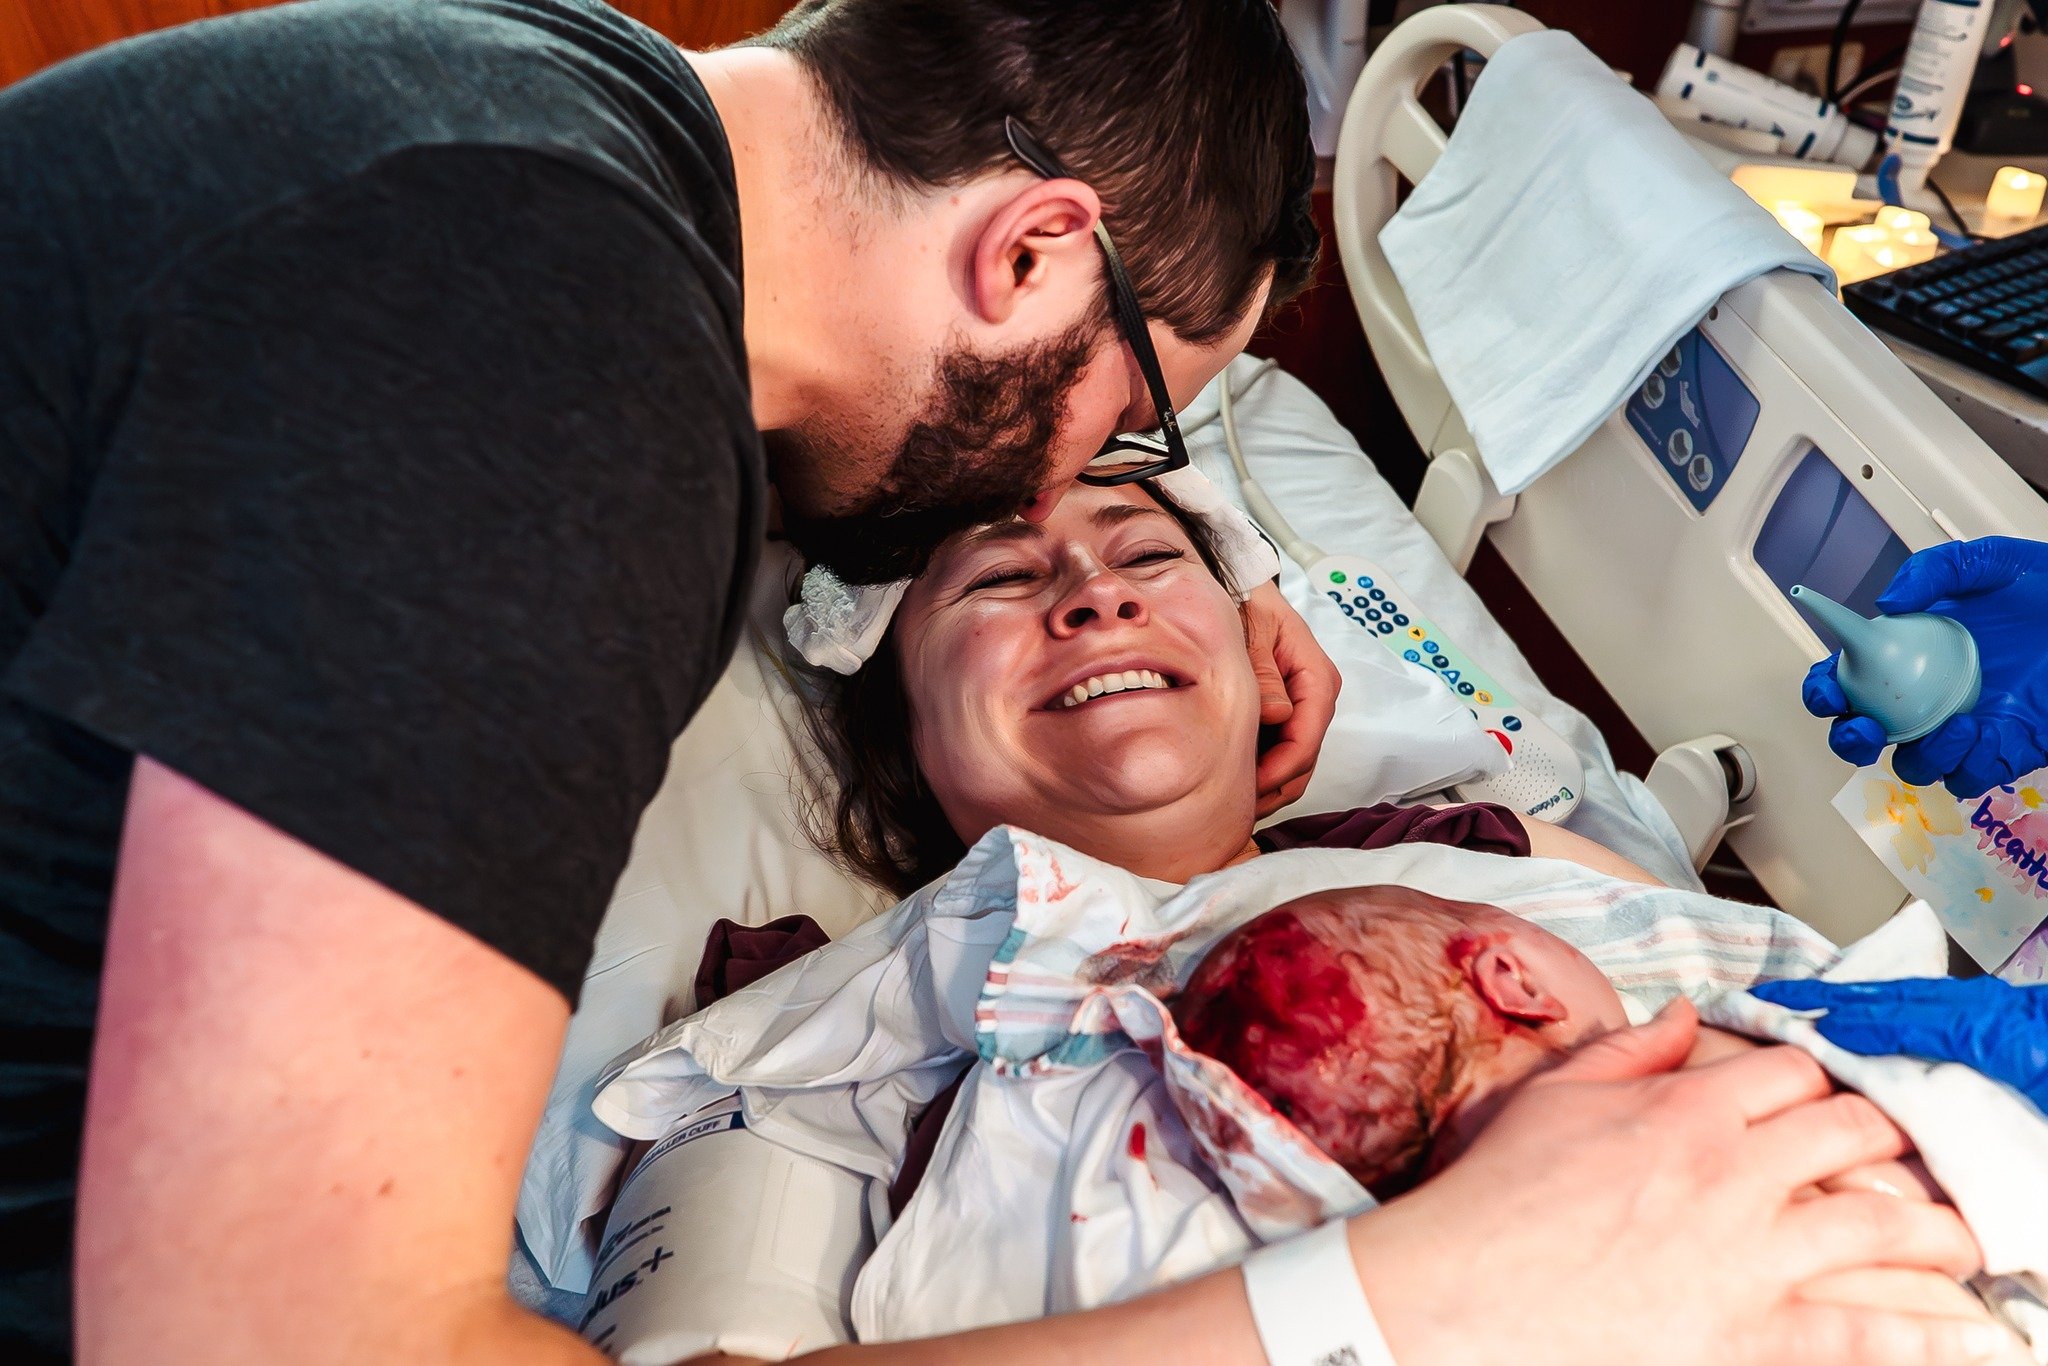 And after just a few powerful pushes, he's here!! A family of four, a beautiful baby boy!

#birth #birthstory #birthgrandrapids #birthphotographer #birthphotography #birthdoula #hospitalbirth #hospitalmidwife #justborn #grandrapidsbirth #grandrapidsb